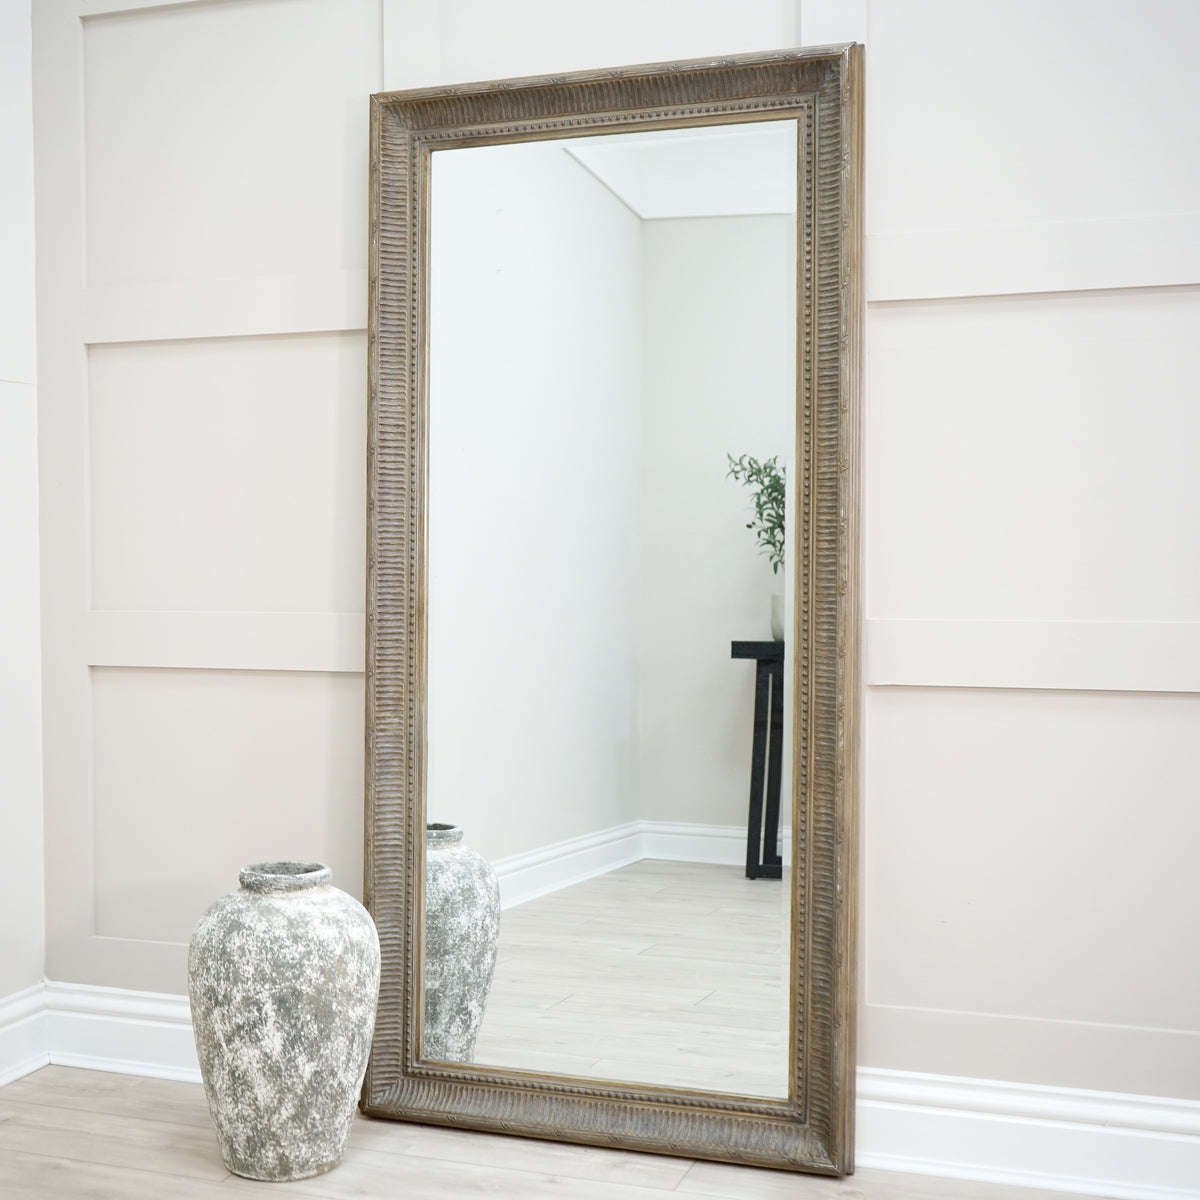 Full length washed wood rectangular mirror leaning against wall